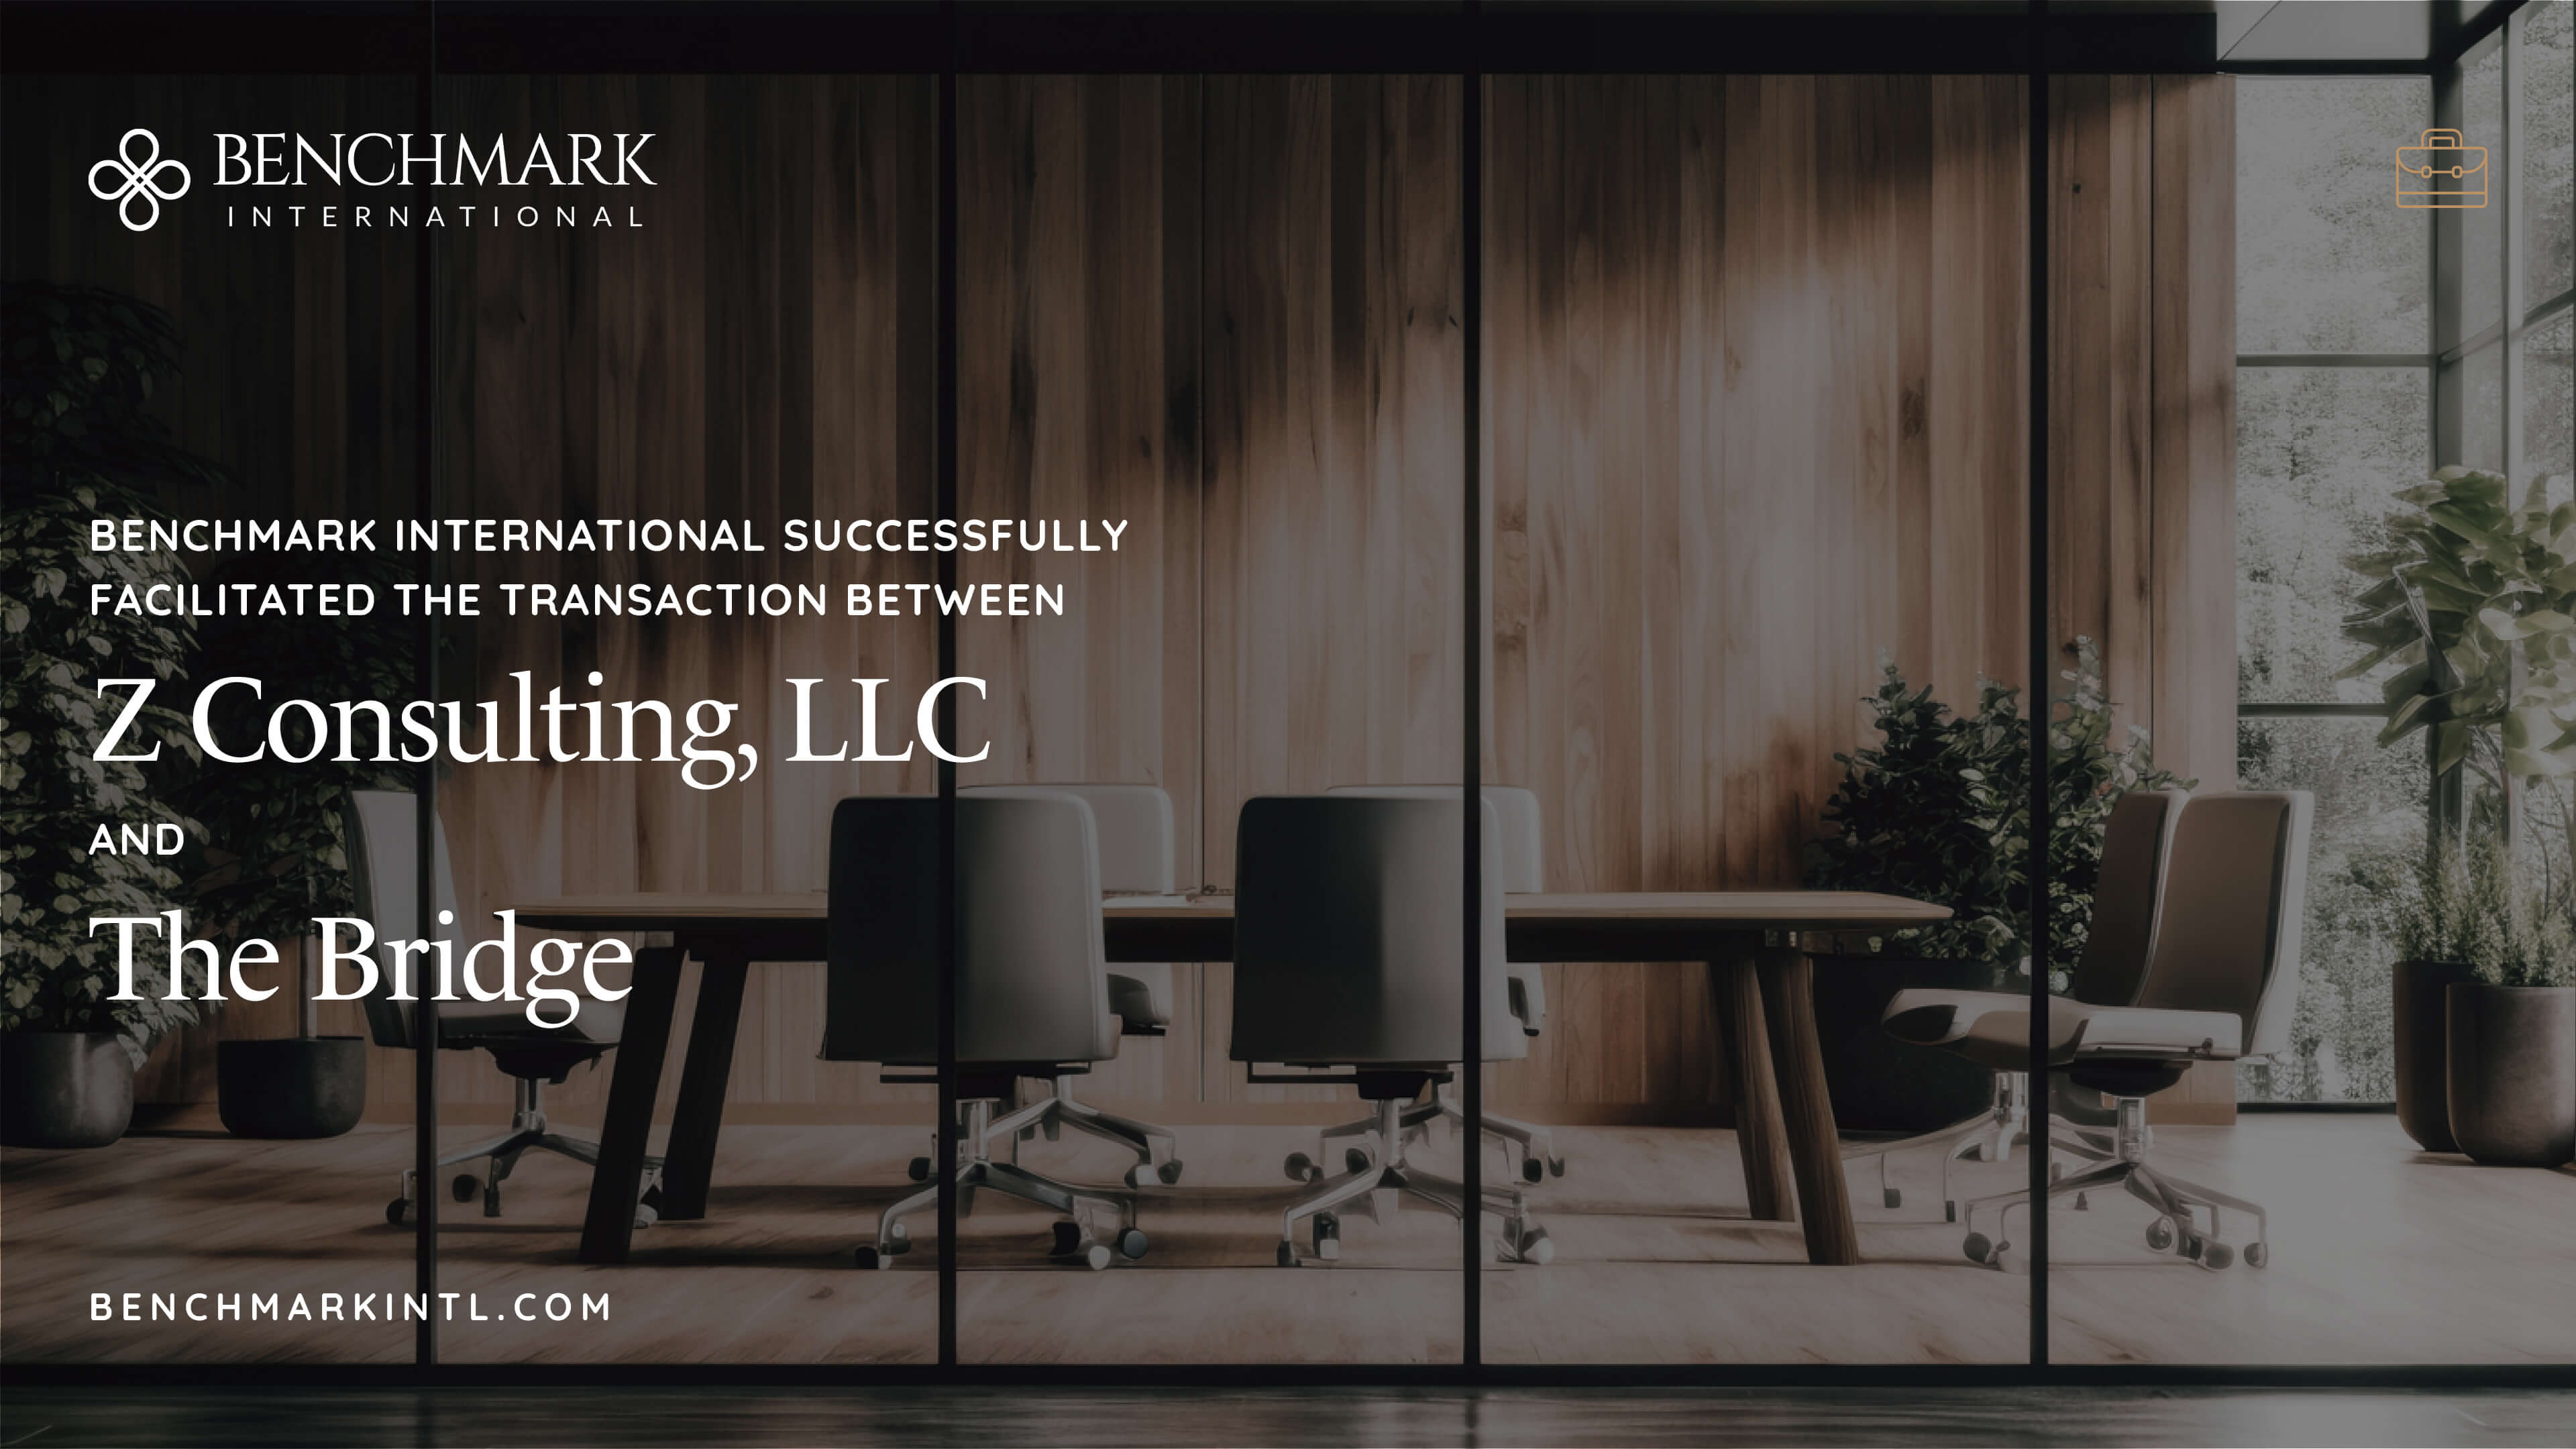 Benchmark International Successfully Facilitated the Transaction Between Z Consulting, LLC and The Bridge